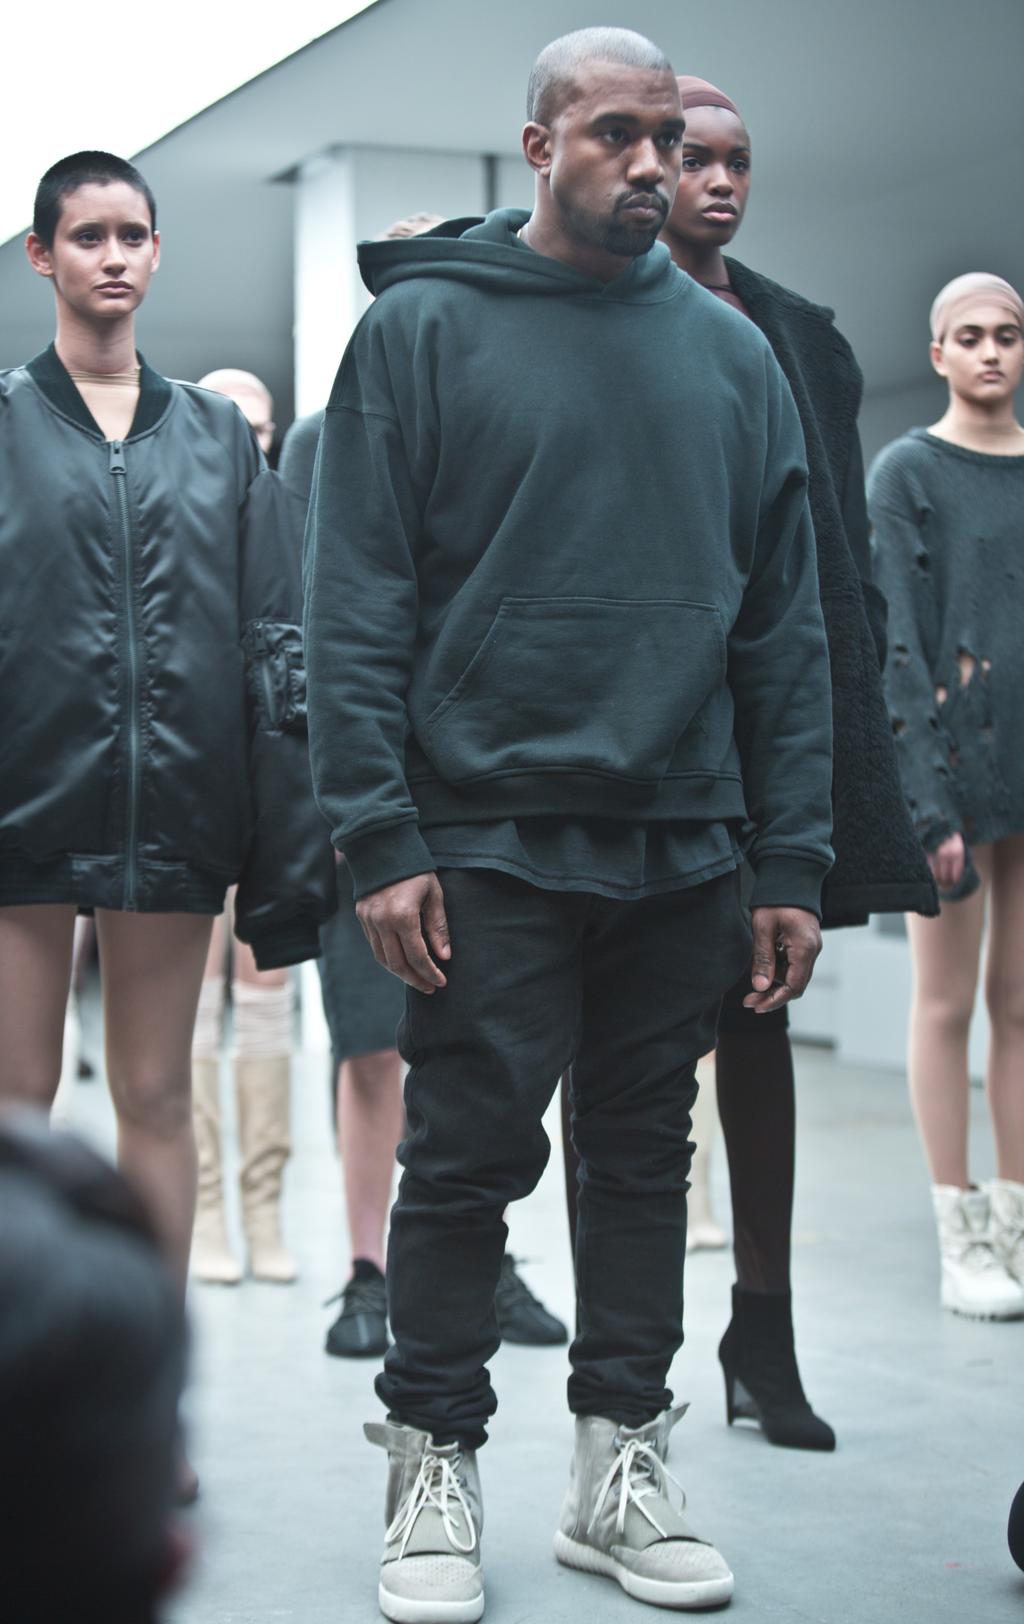 Mm Doctrine Volcano Everything you need to know about Yeezy Season 3 and Kanye West's new album  - Vogue Australia